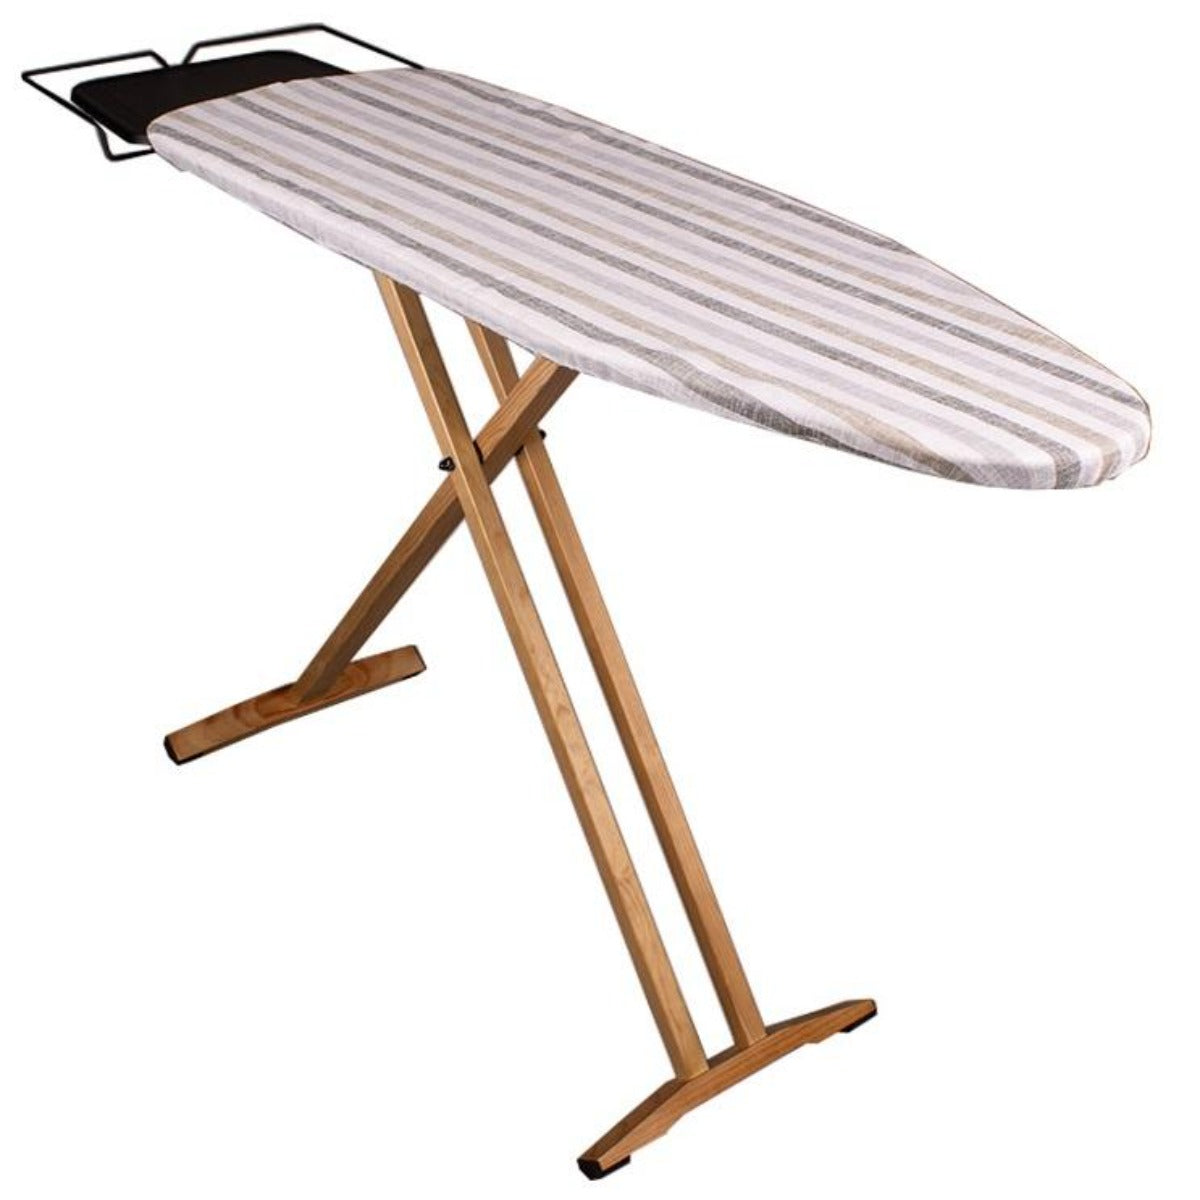 NUBAR foldable wooden ironing board 130x47 H92cm 100% cotton cover with iron rest and central steamer